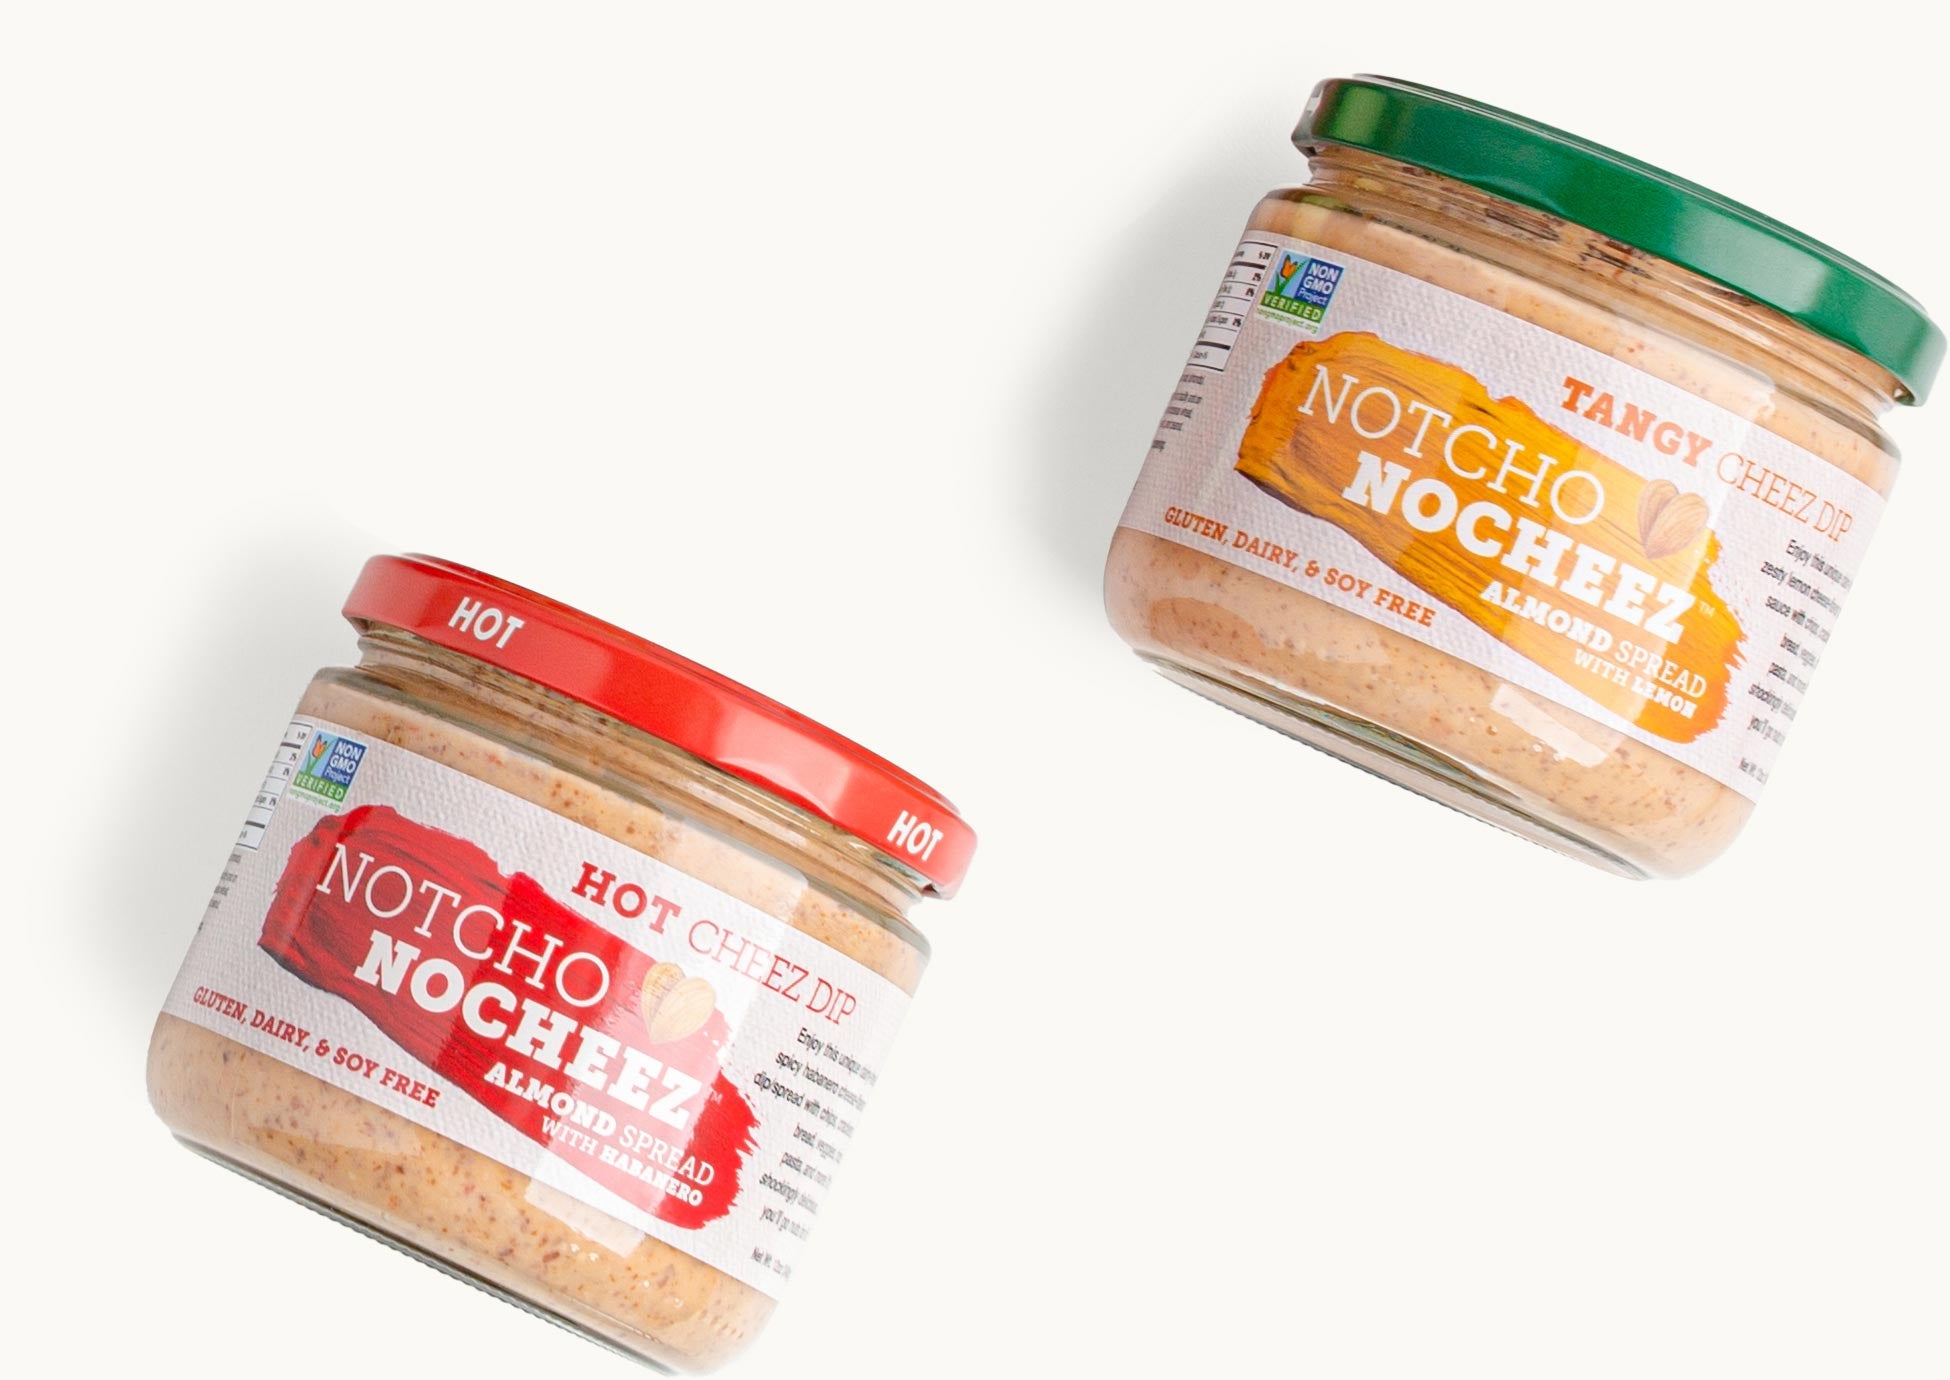 Hot & Tangy jars of Notcho Nocheez dip